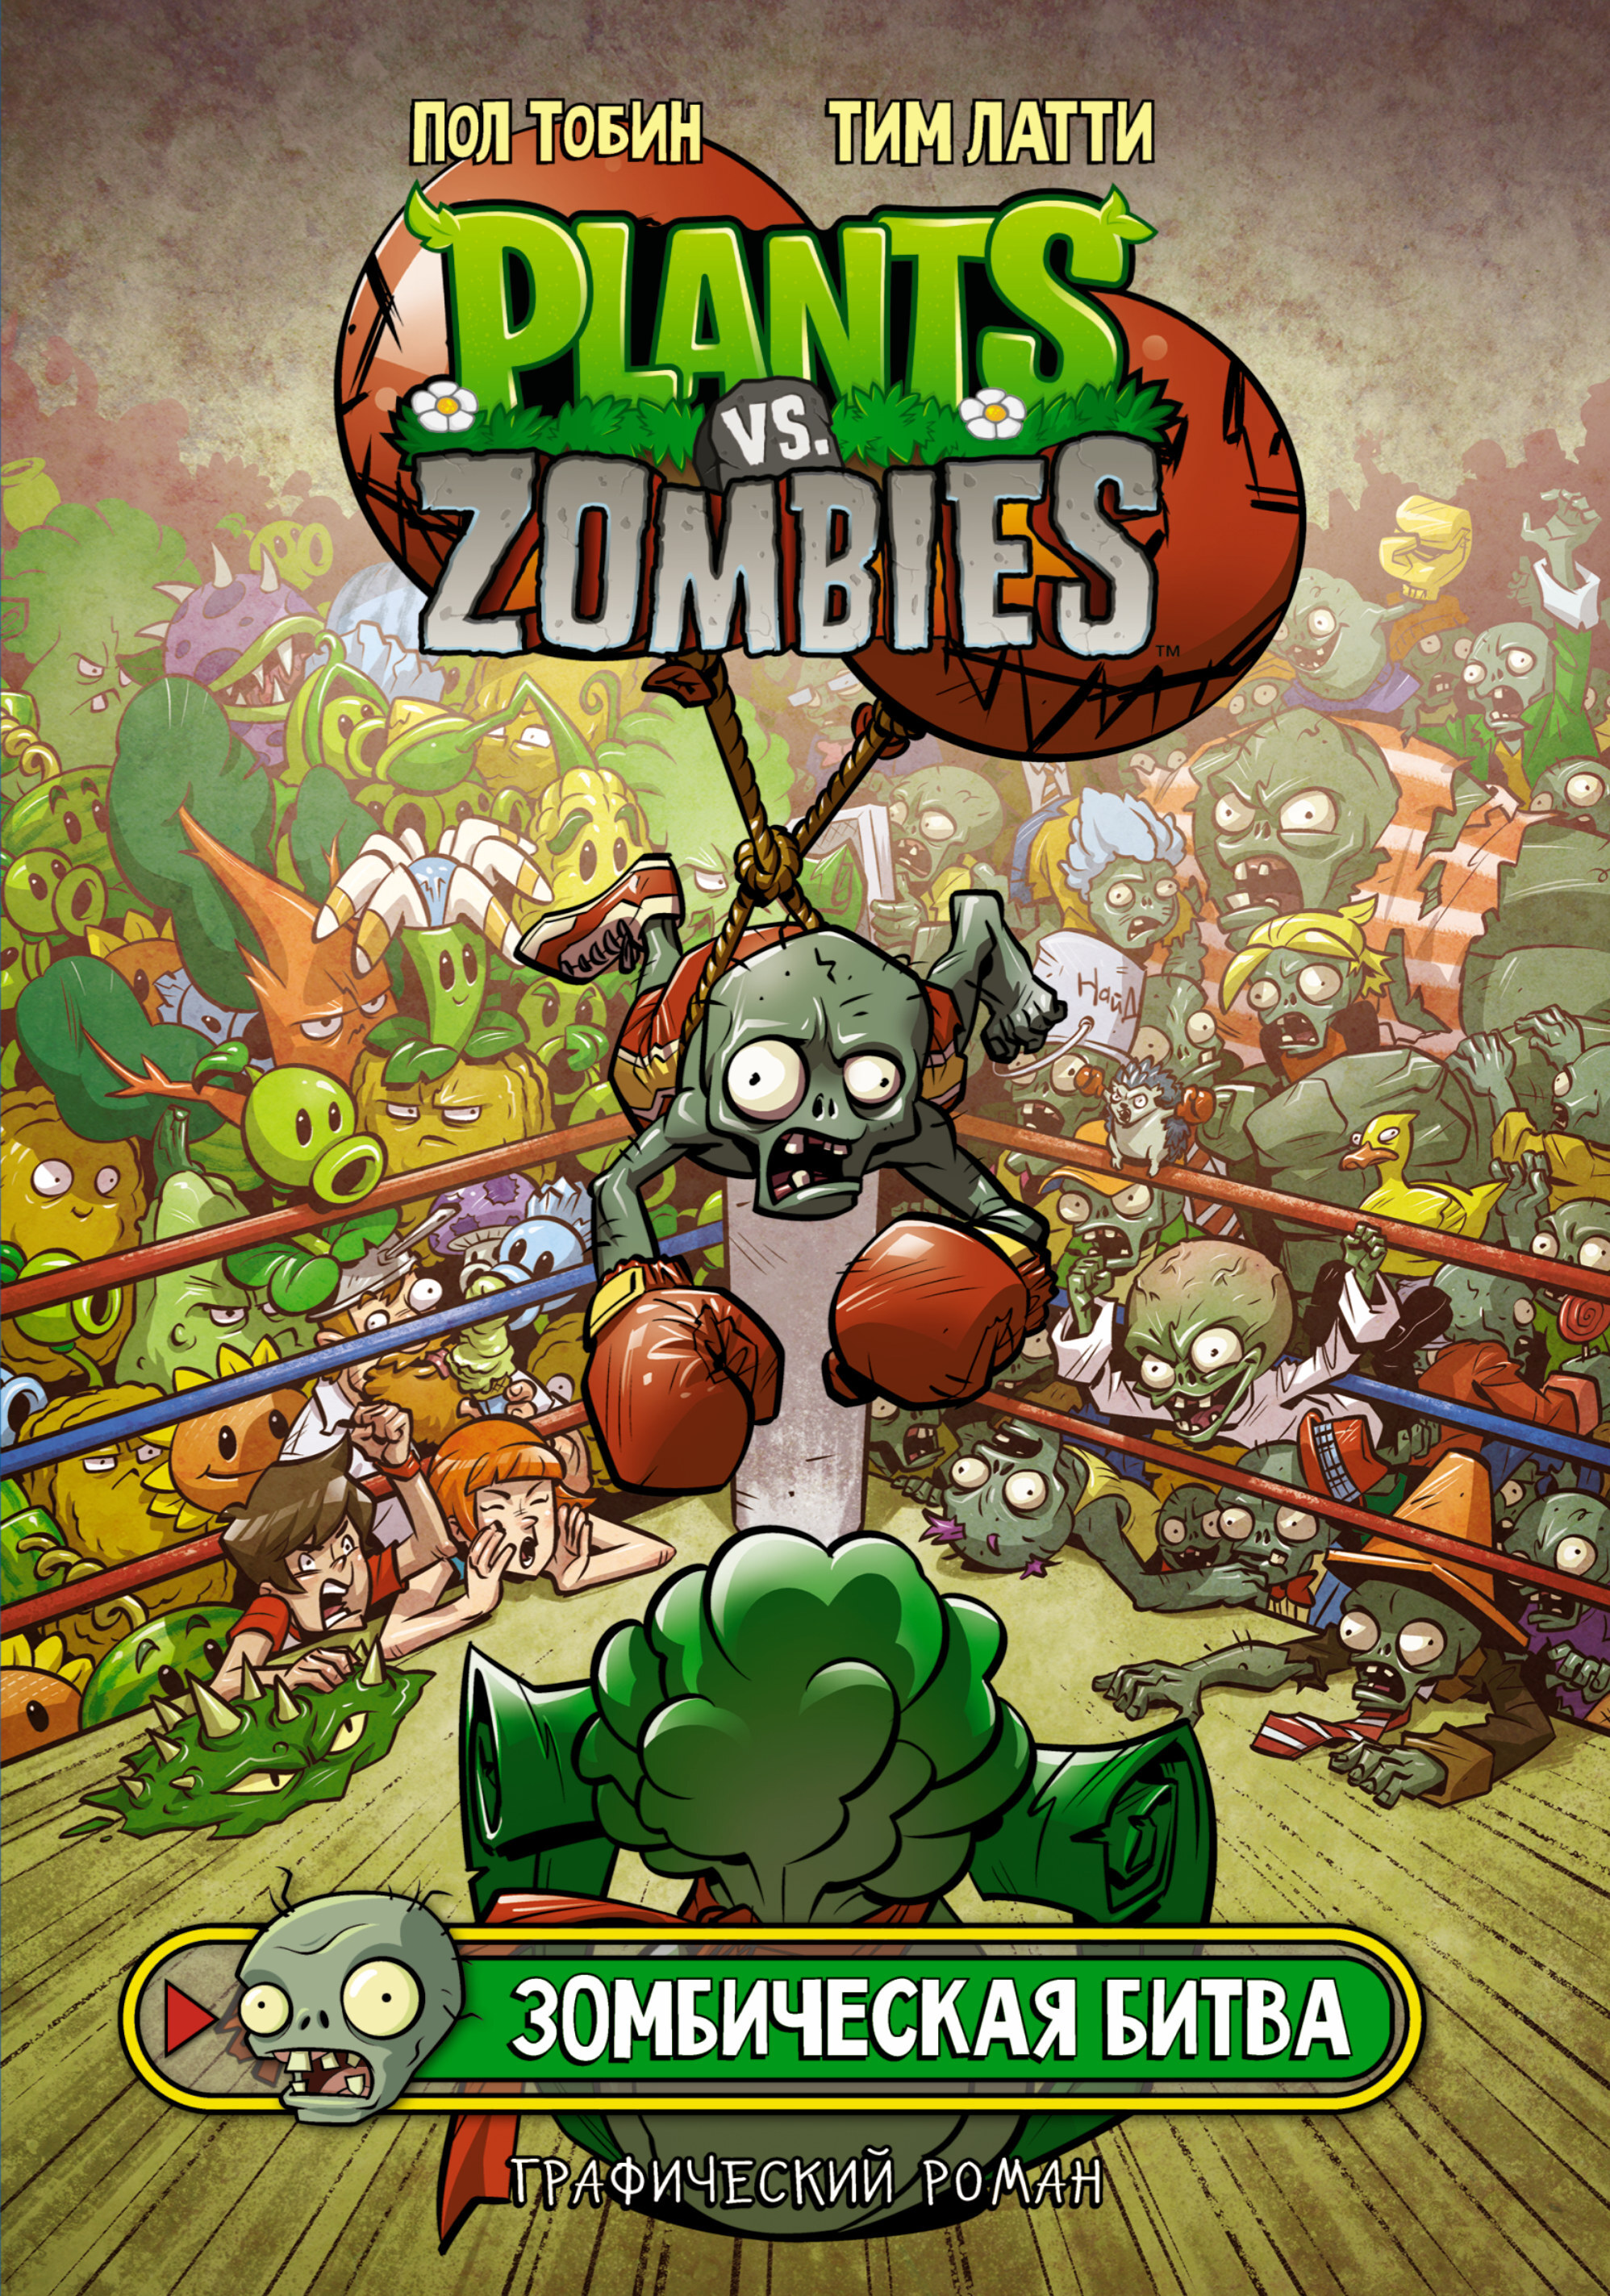 Plants vs zombies 2 not on steam фото 111